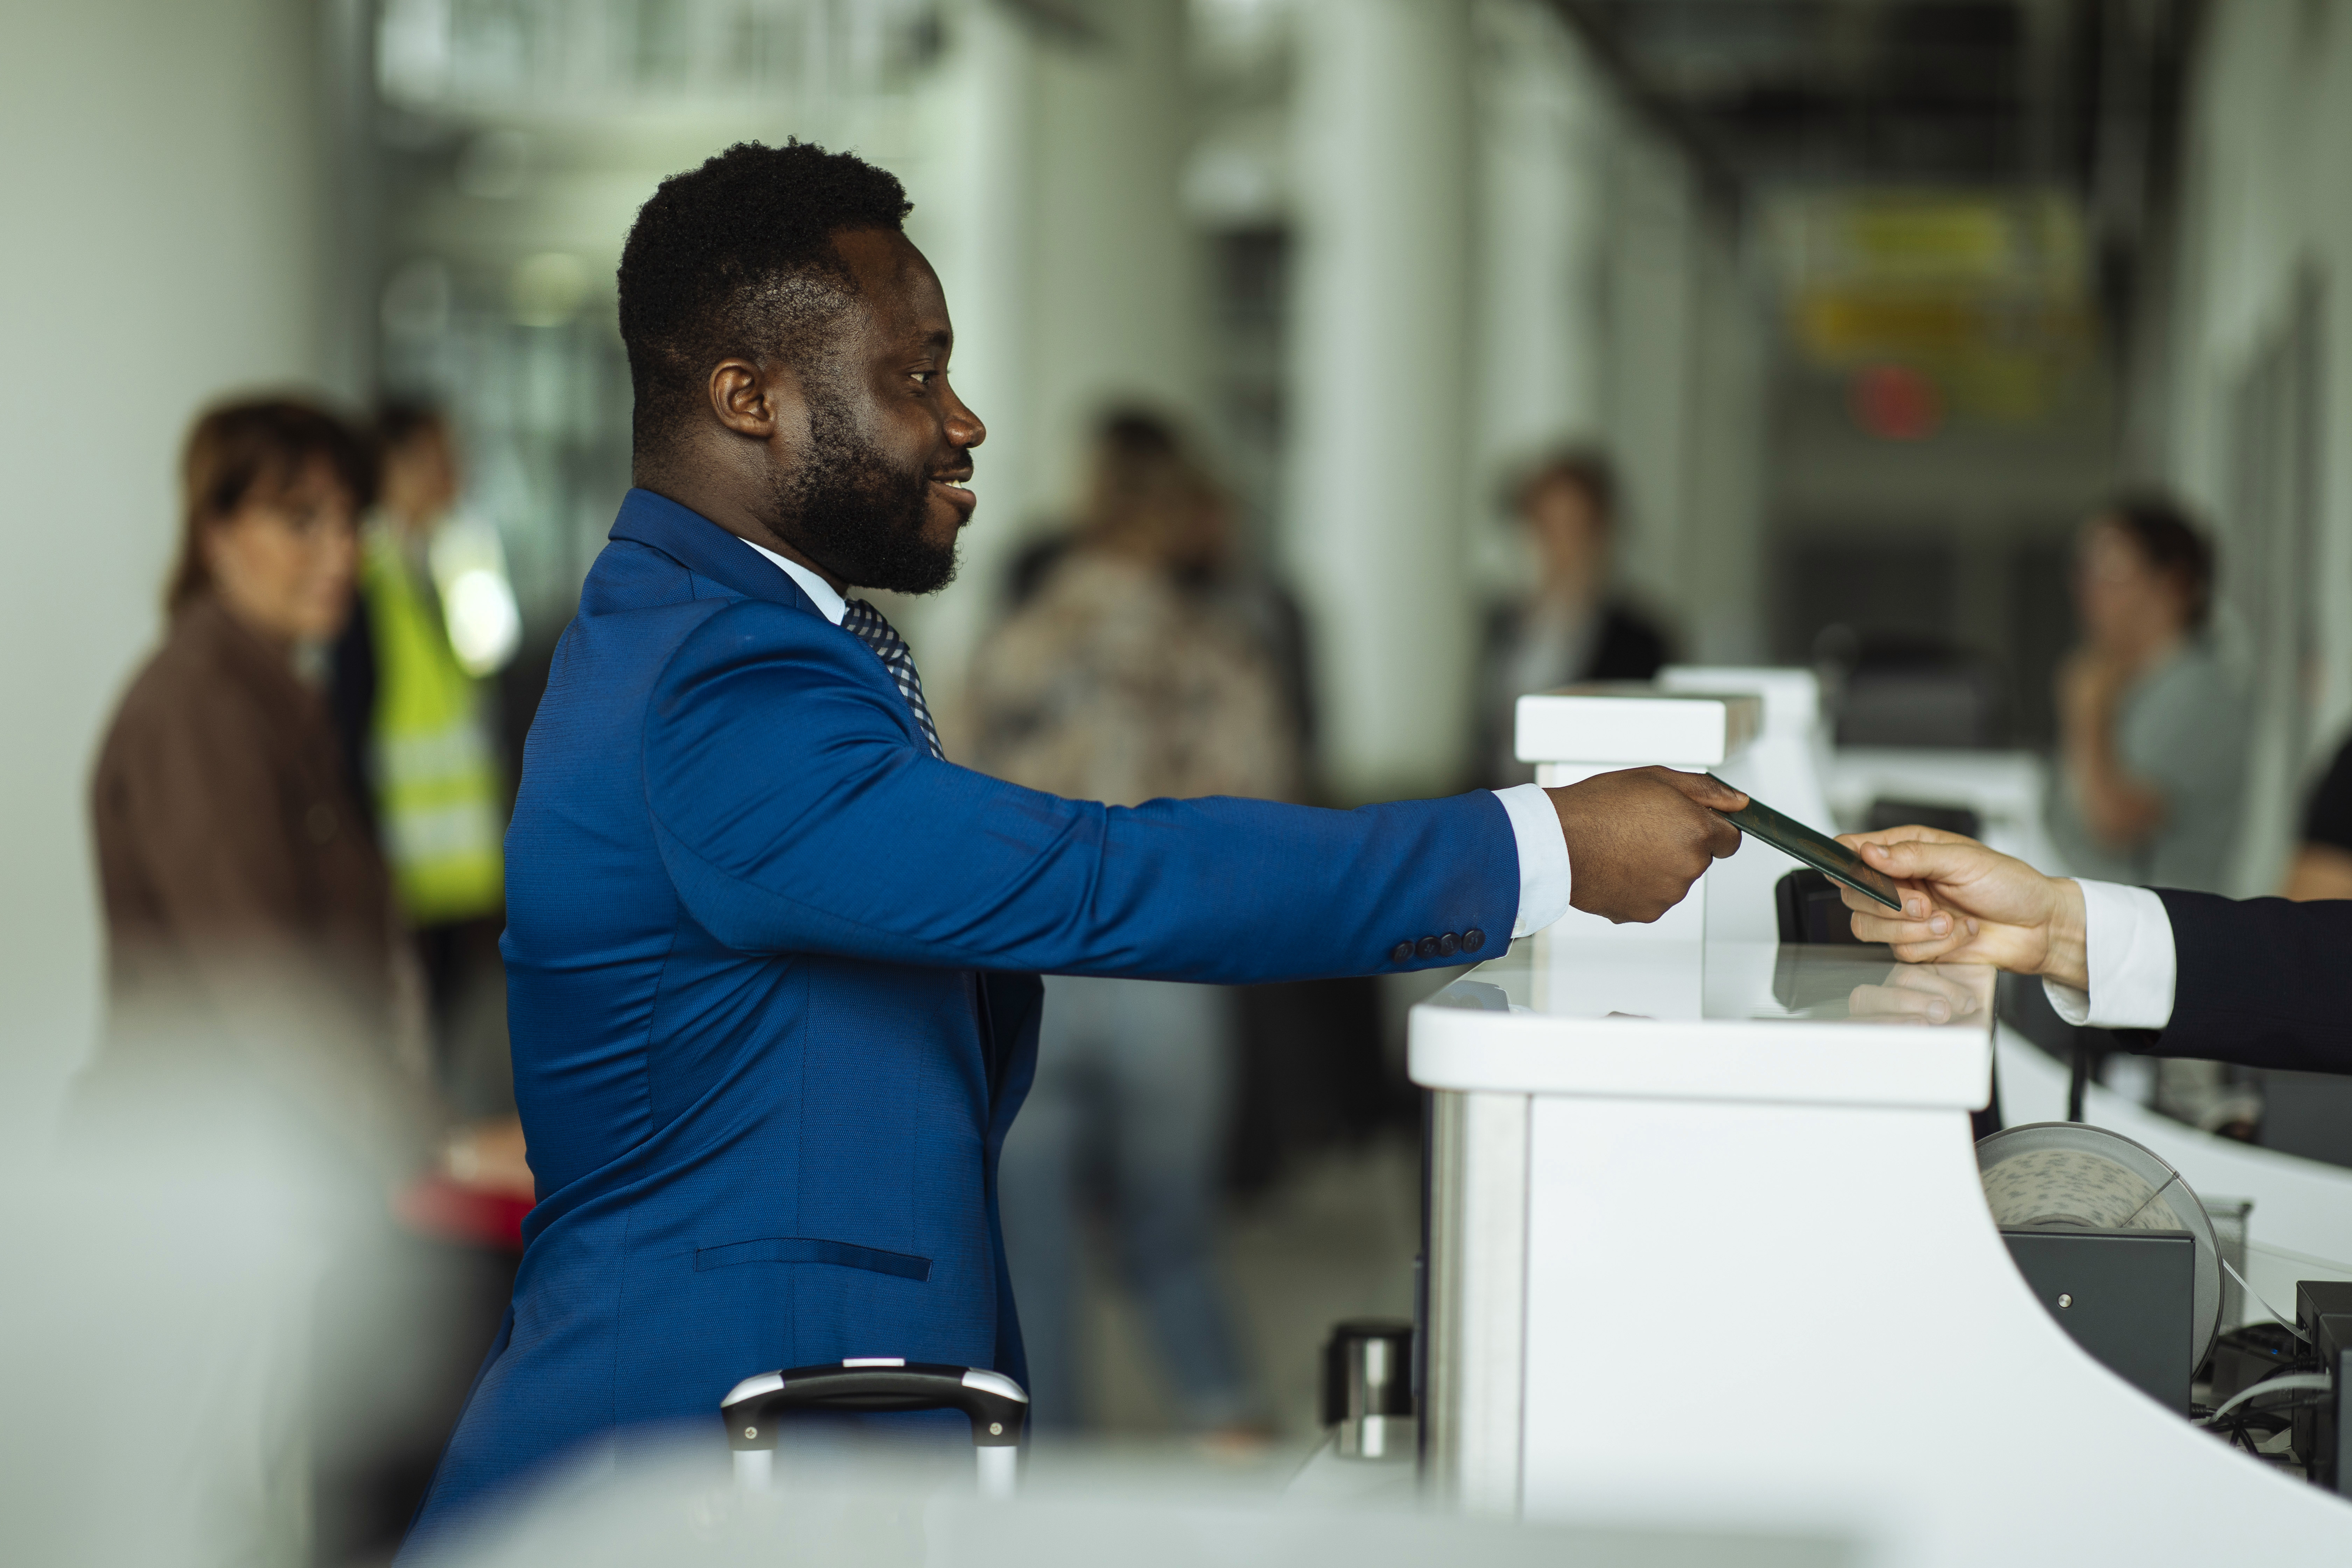 Man in suit handing over passport and boarding pass to airport staff at check-in counter